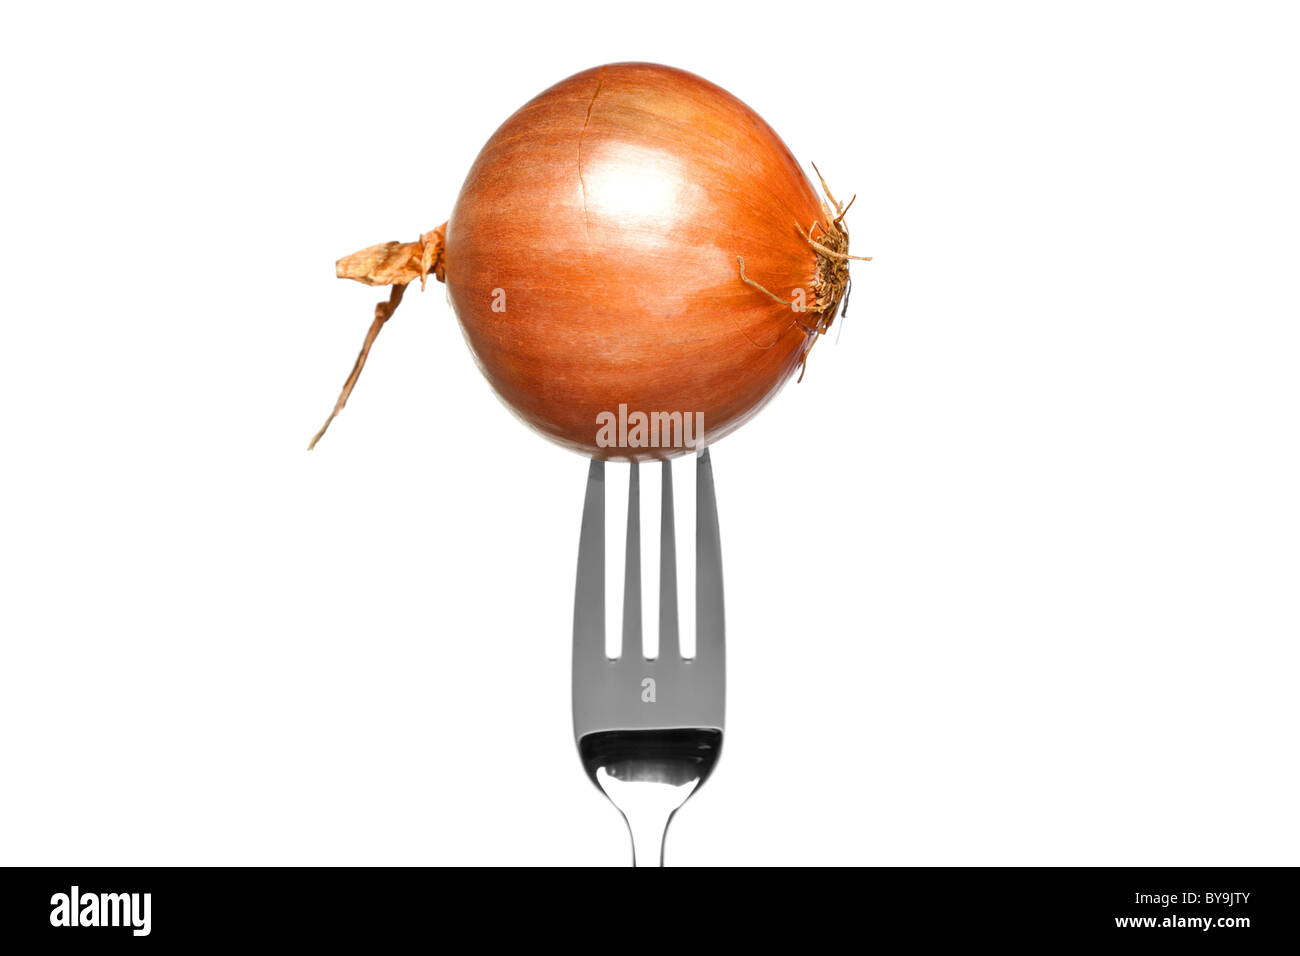 Photo of a brown onion on a fork isolated on a white background, part of a series. Stock Photo